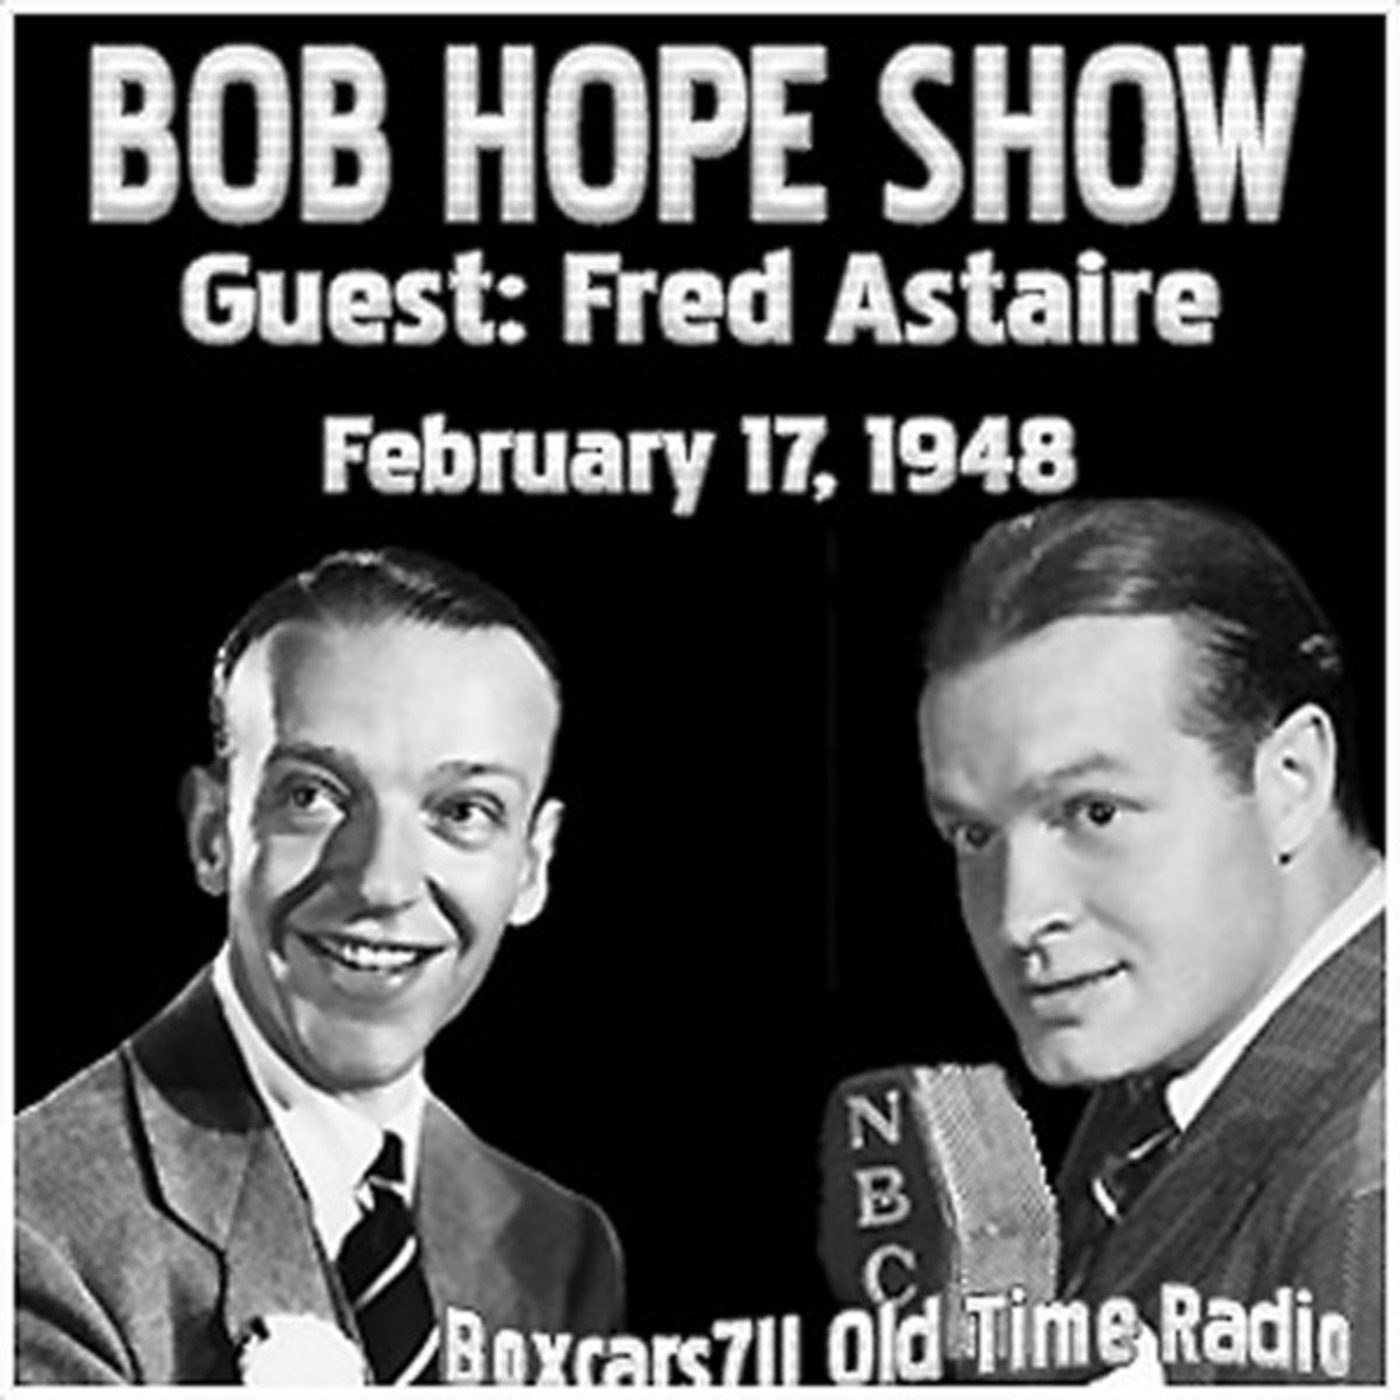 Episode 9712:  Bob Hope Pepsodent Show - Guest Fred Astaire (02-17-48)